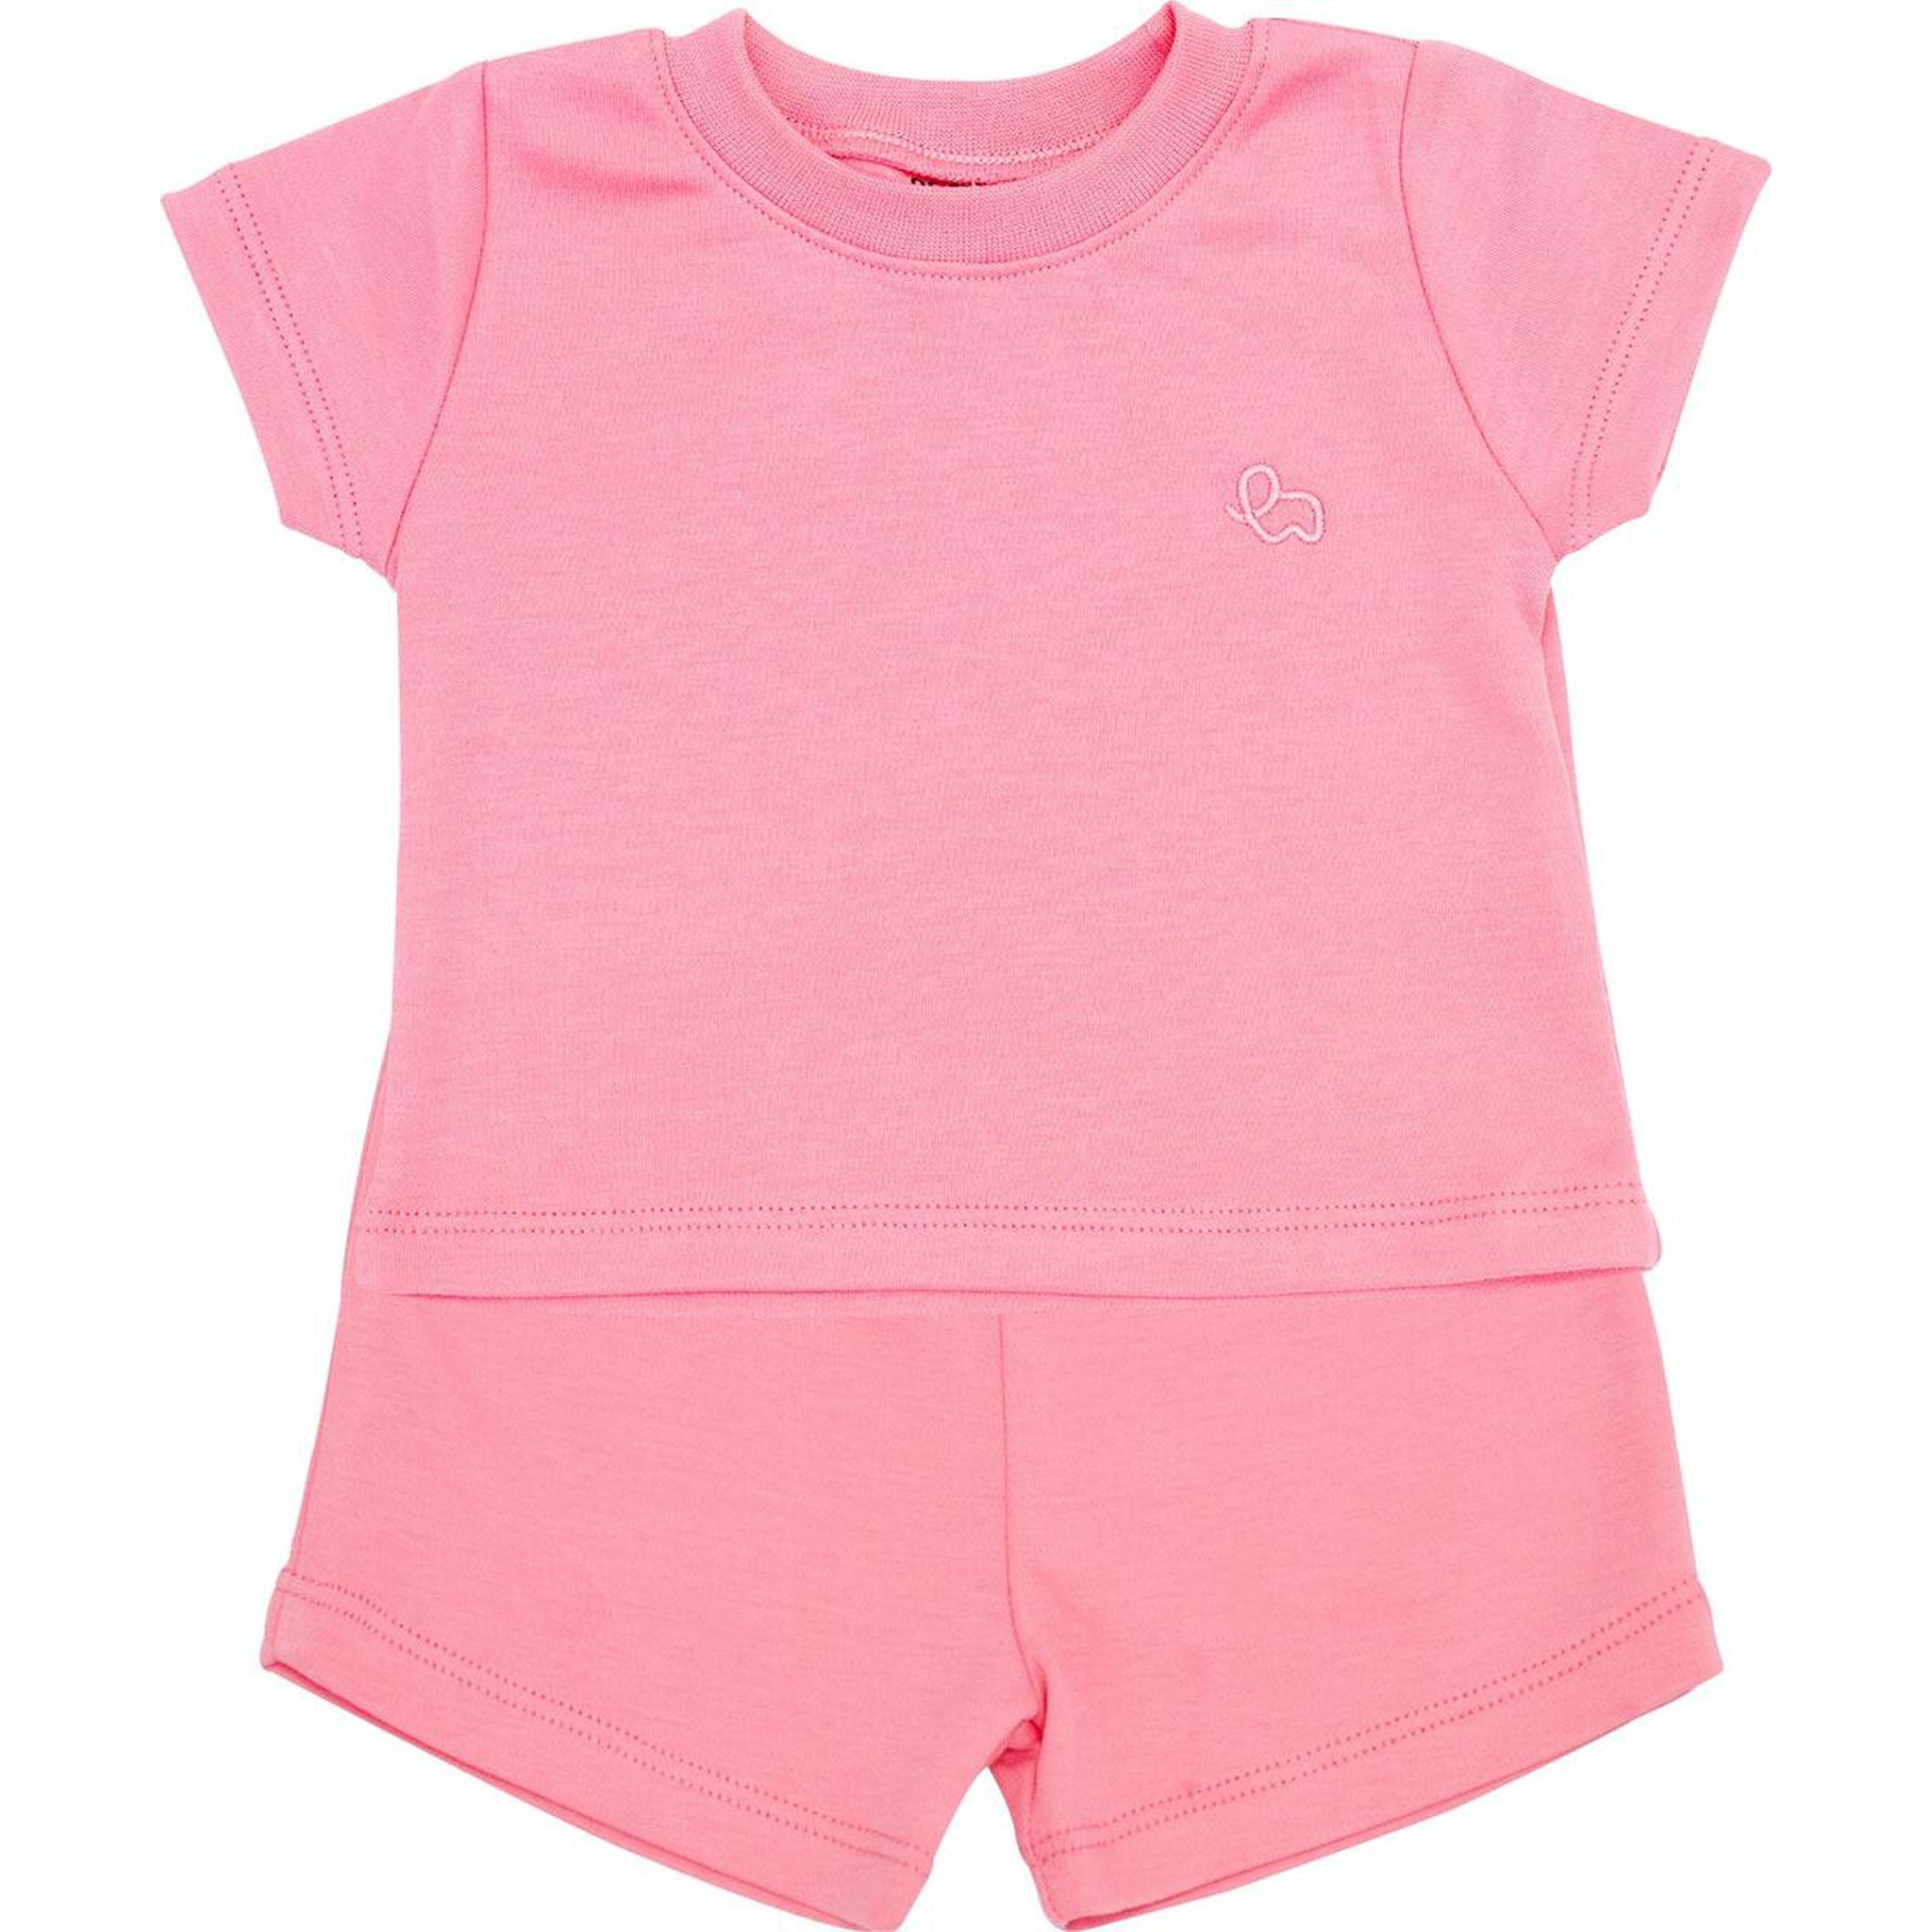 Unisex Playset Solid Pink w/Embroidery